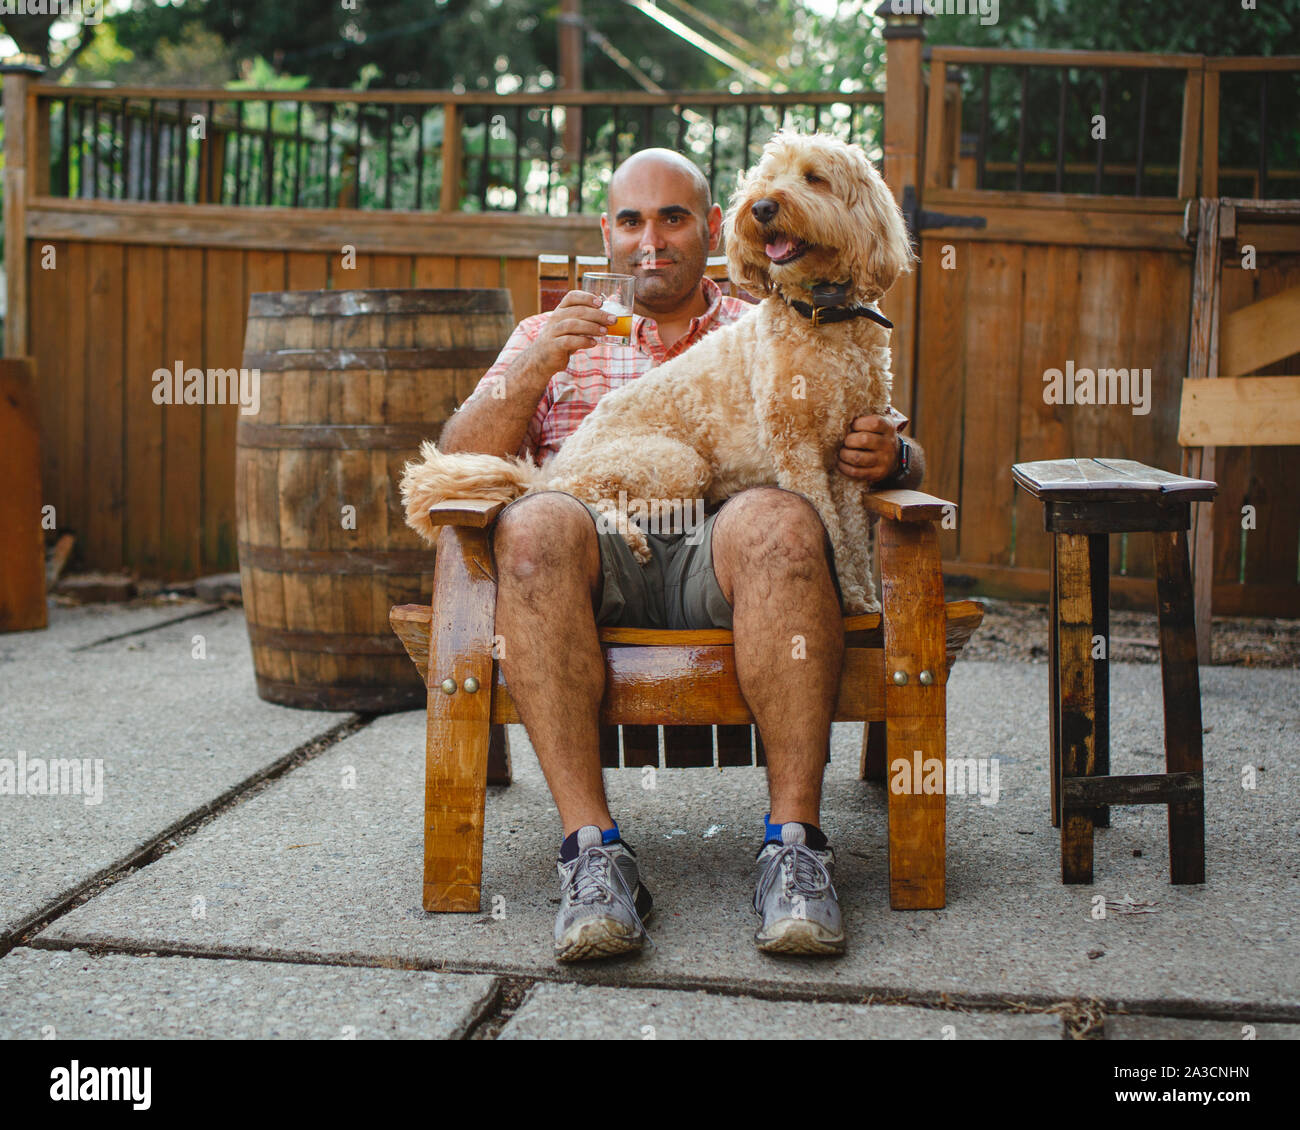 A happy man sits with glass of bourbon and dog on lap on wooden chair Stock Photo